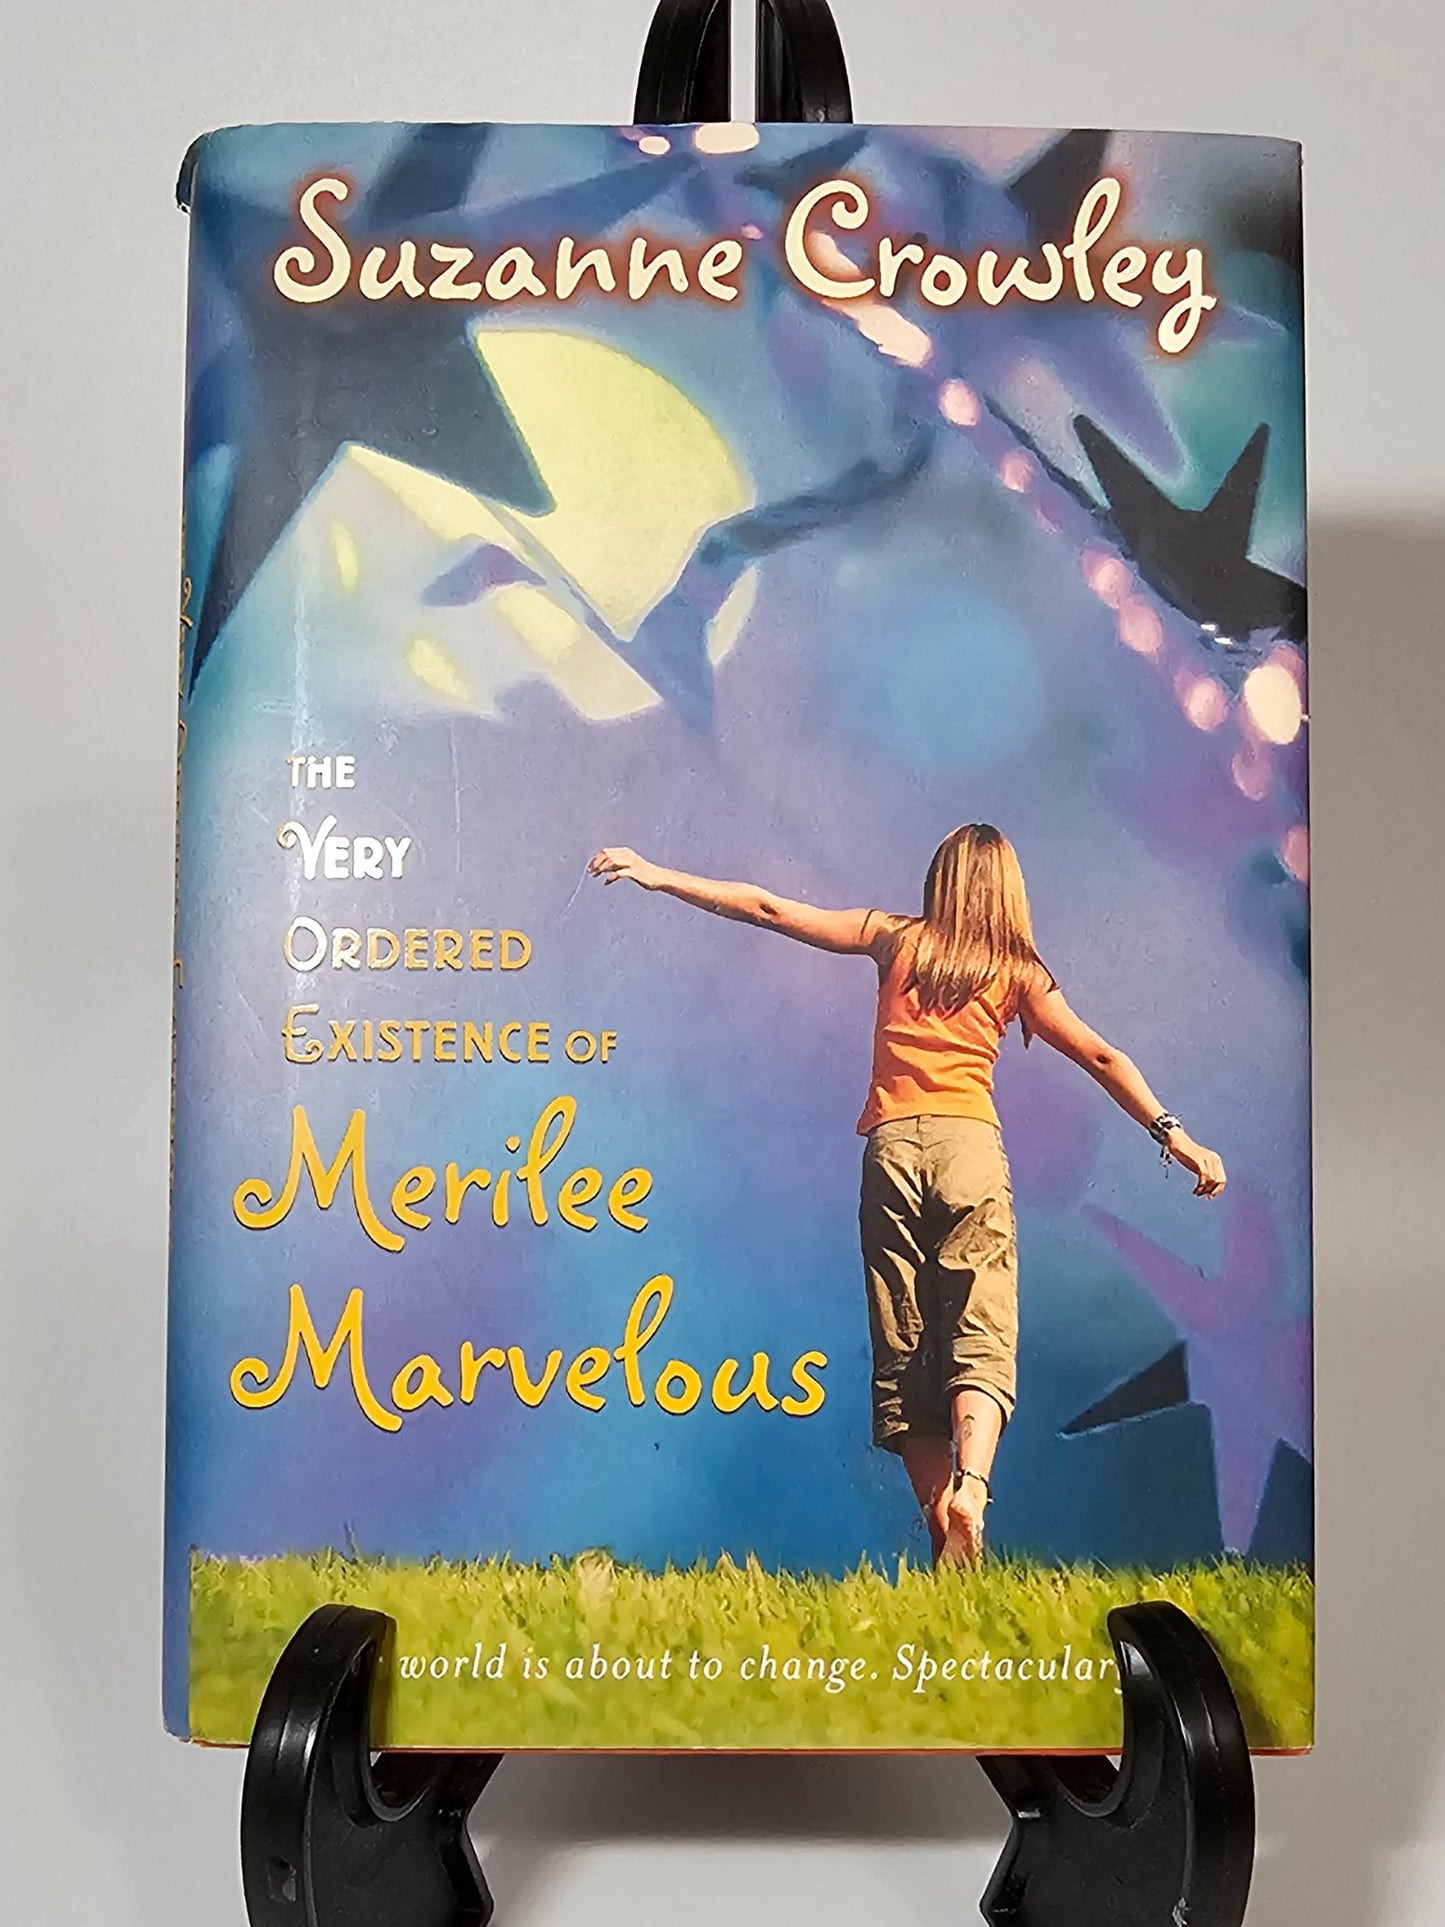 The Very Ordered Existence of Merilee Marvelous by Suzanne Crowley